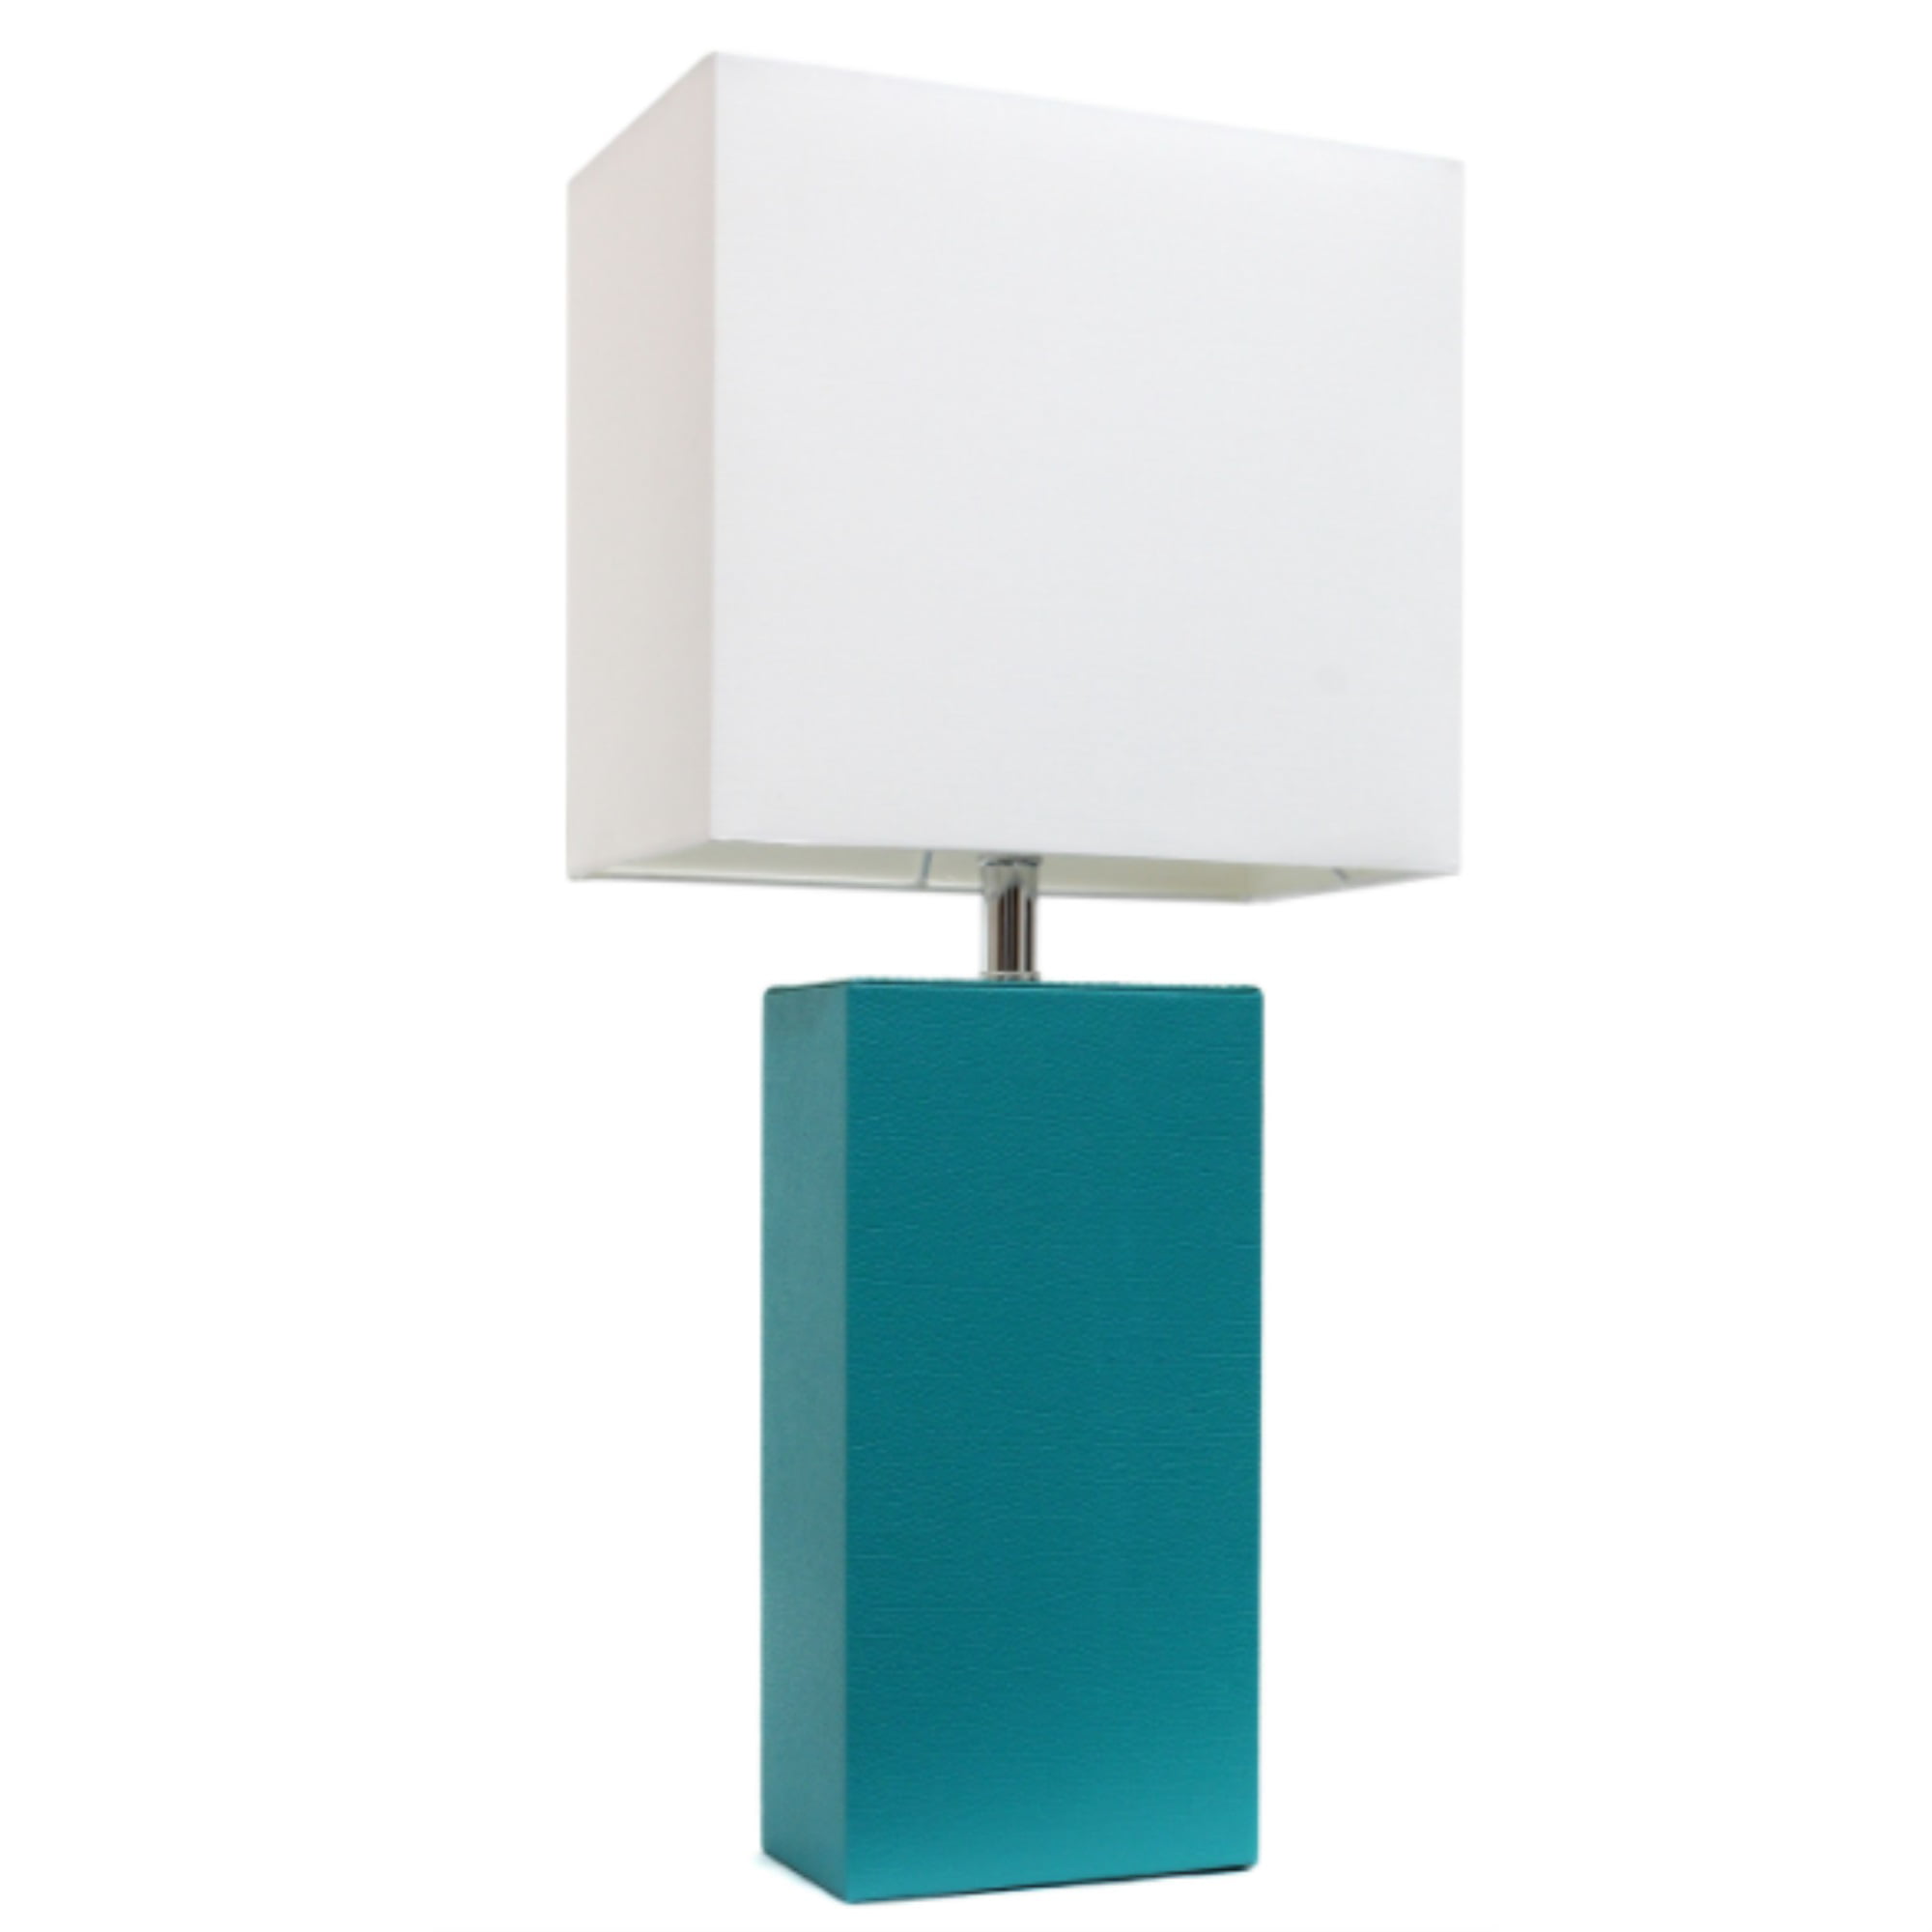 Elegant Designs Modern Leather Table Lamp with White Fabric Shade, Teal